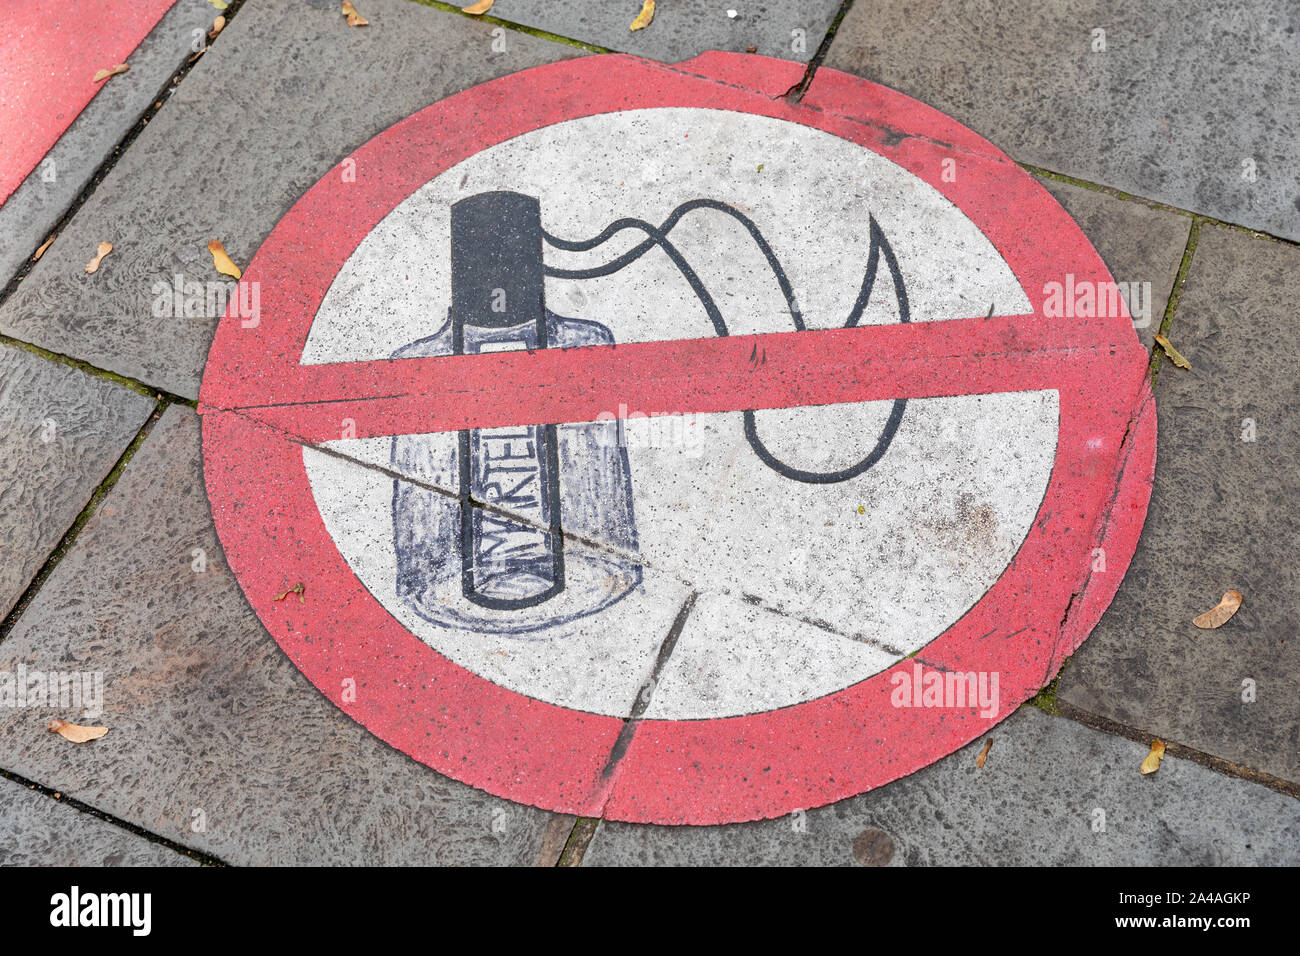 A no alcohol consumption sign painted onto the pavement on a private area on a city street Stock Photo